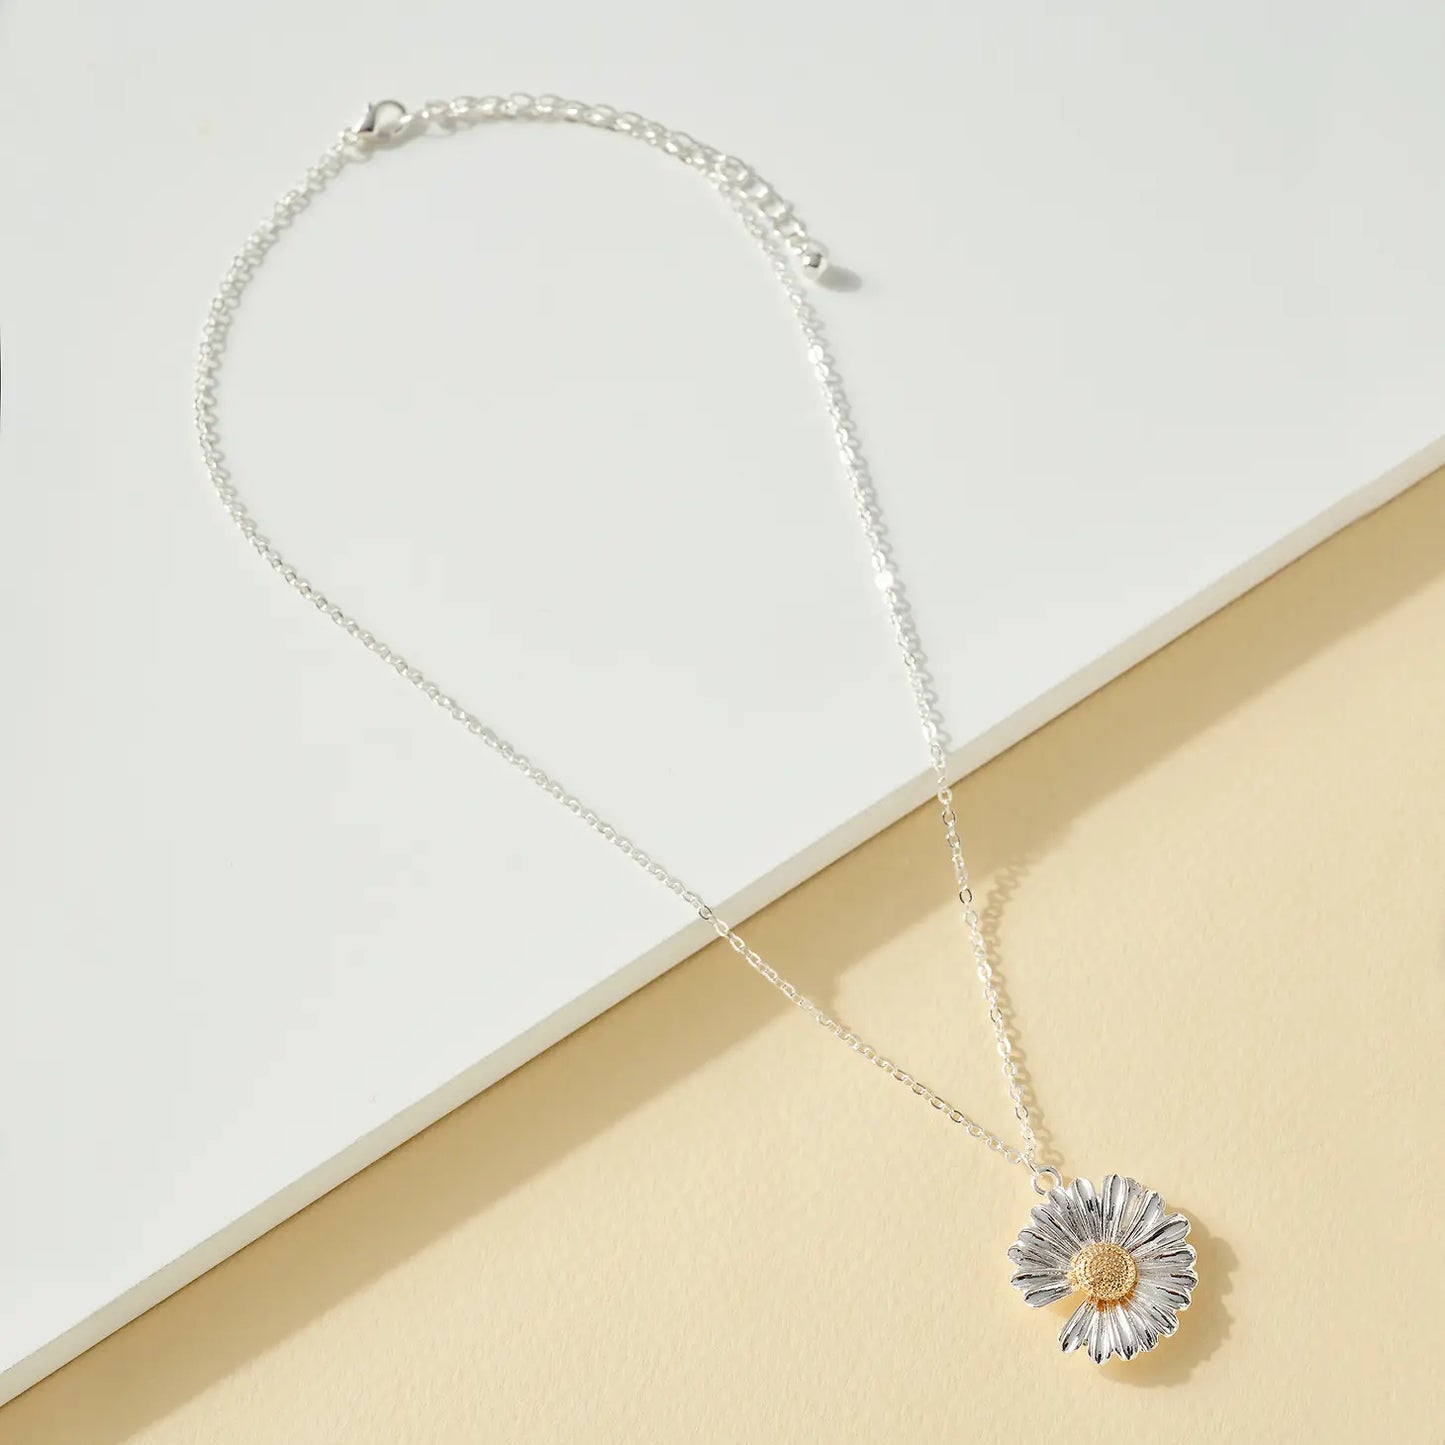 Silver + Gold Sunflower Necklace